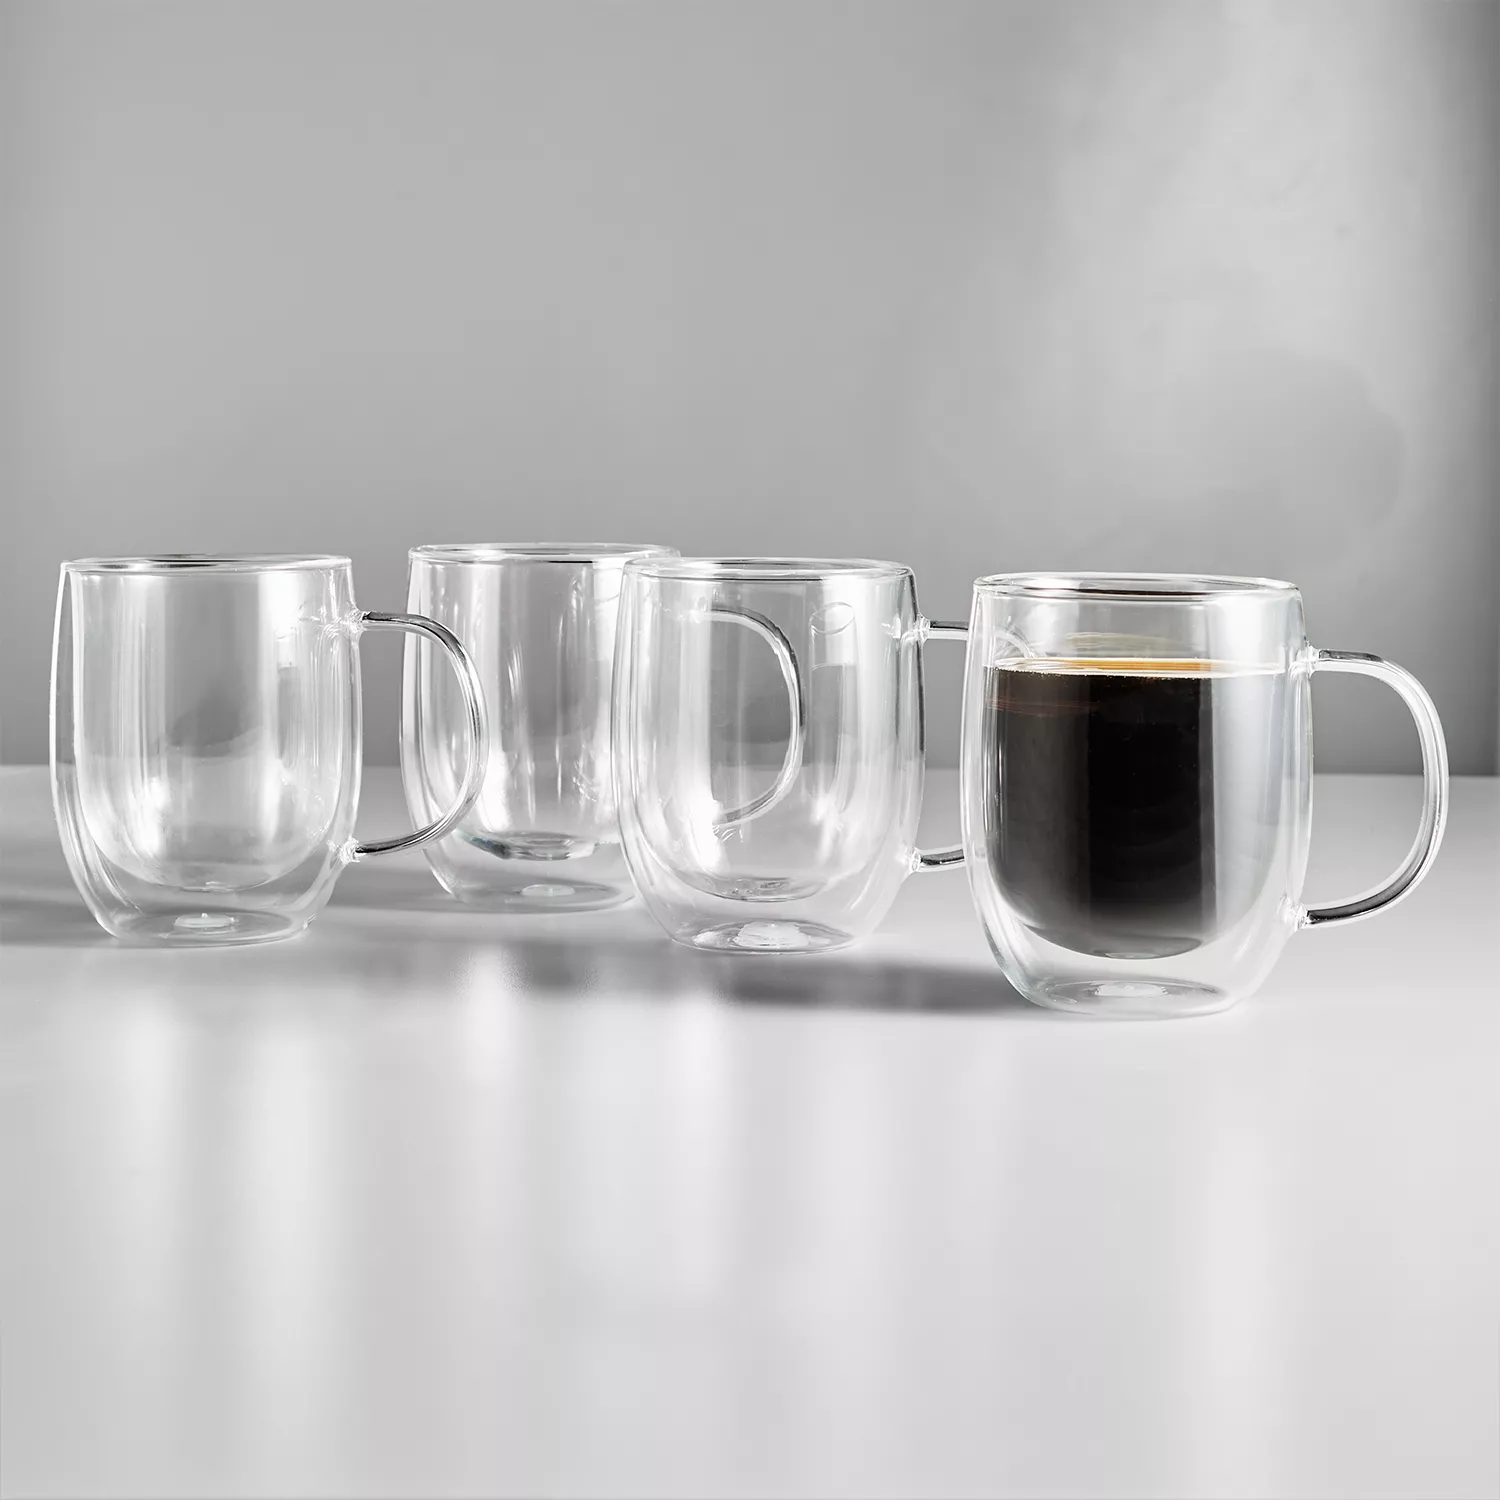 Double-Wall Insulated Latte Glasses (2) – Brod & Taylor